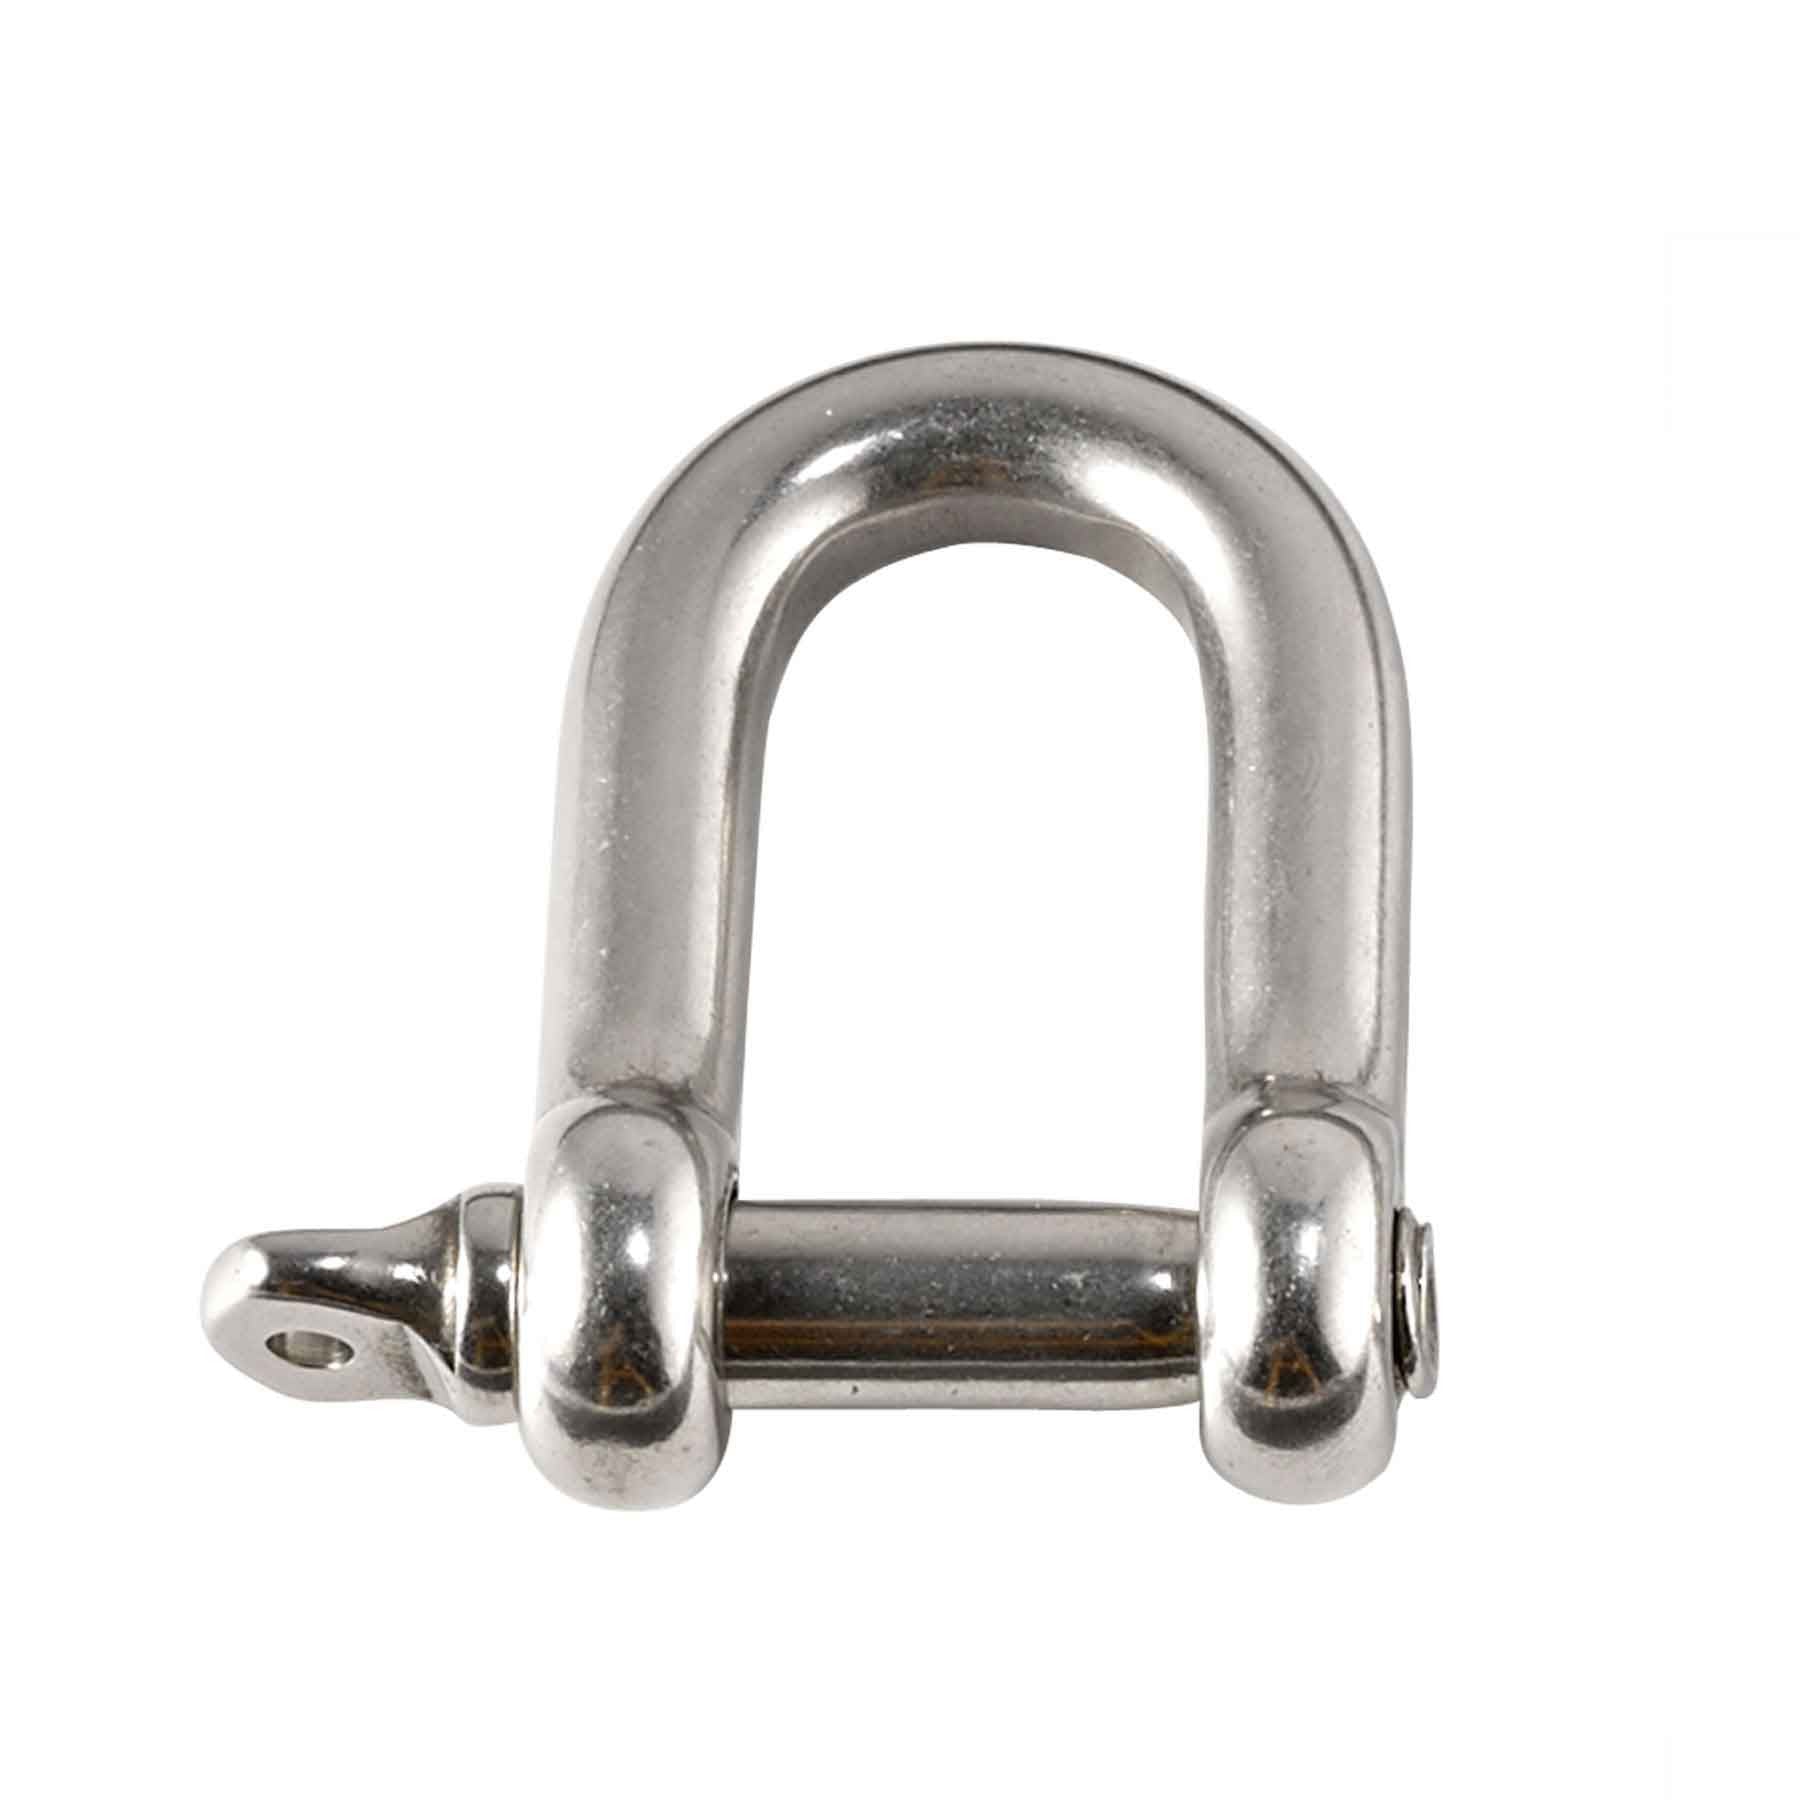 Squids 3790 Tool Shackle - 2-Pack-eSafety Supplies, Inc